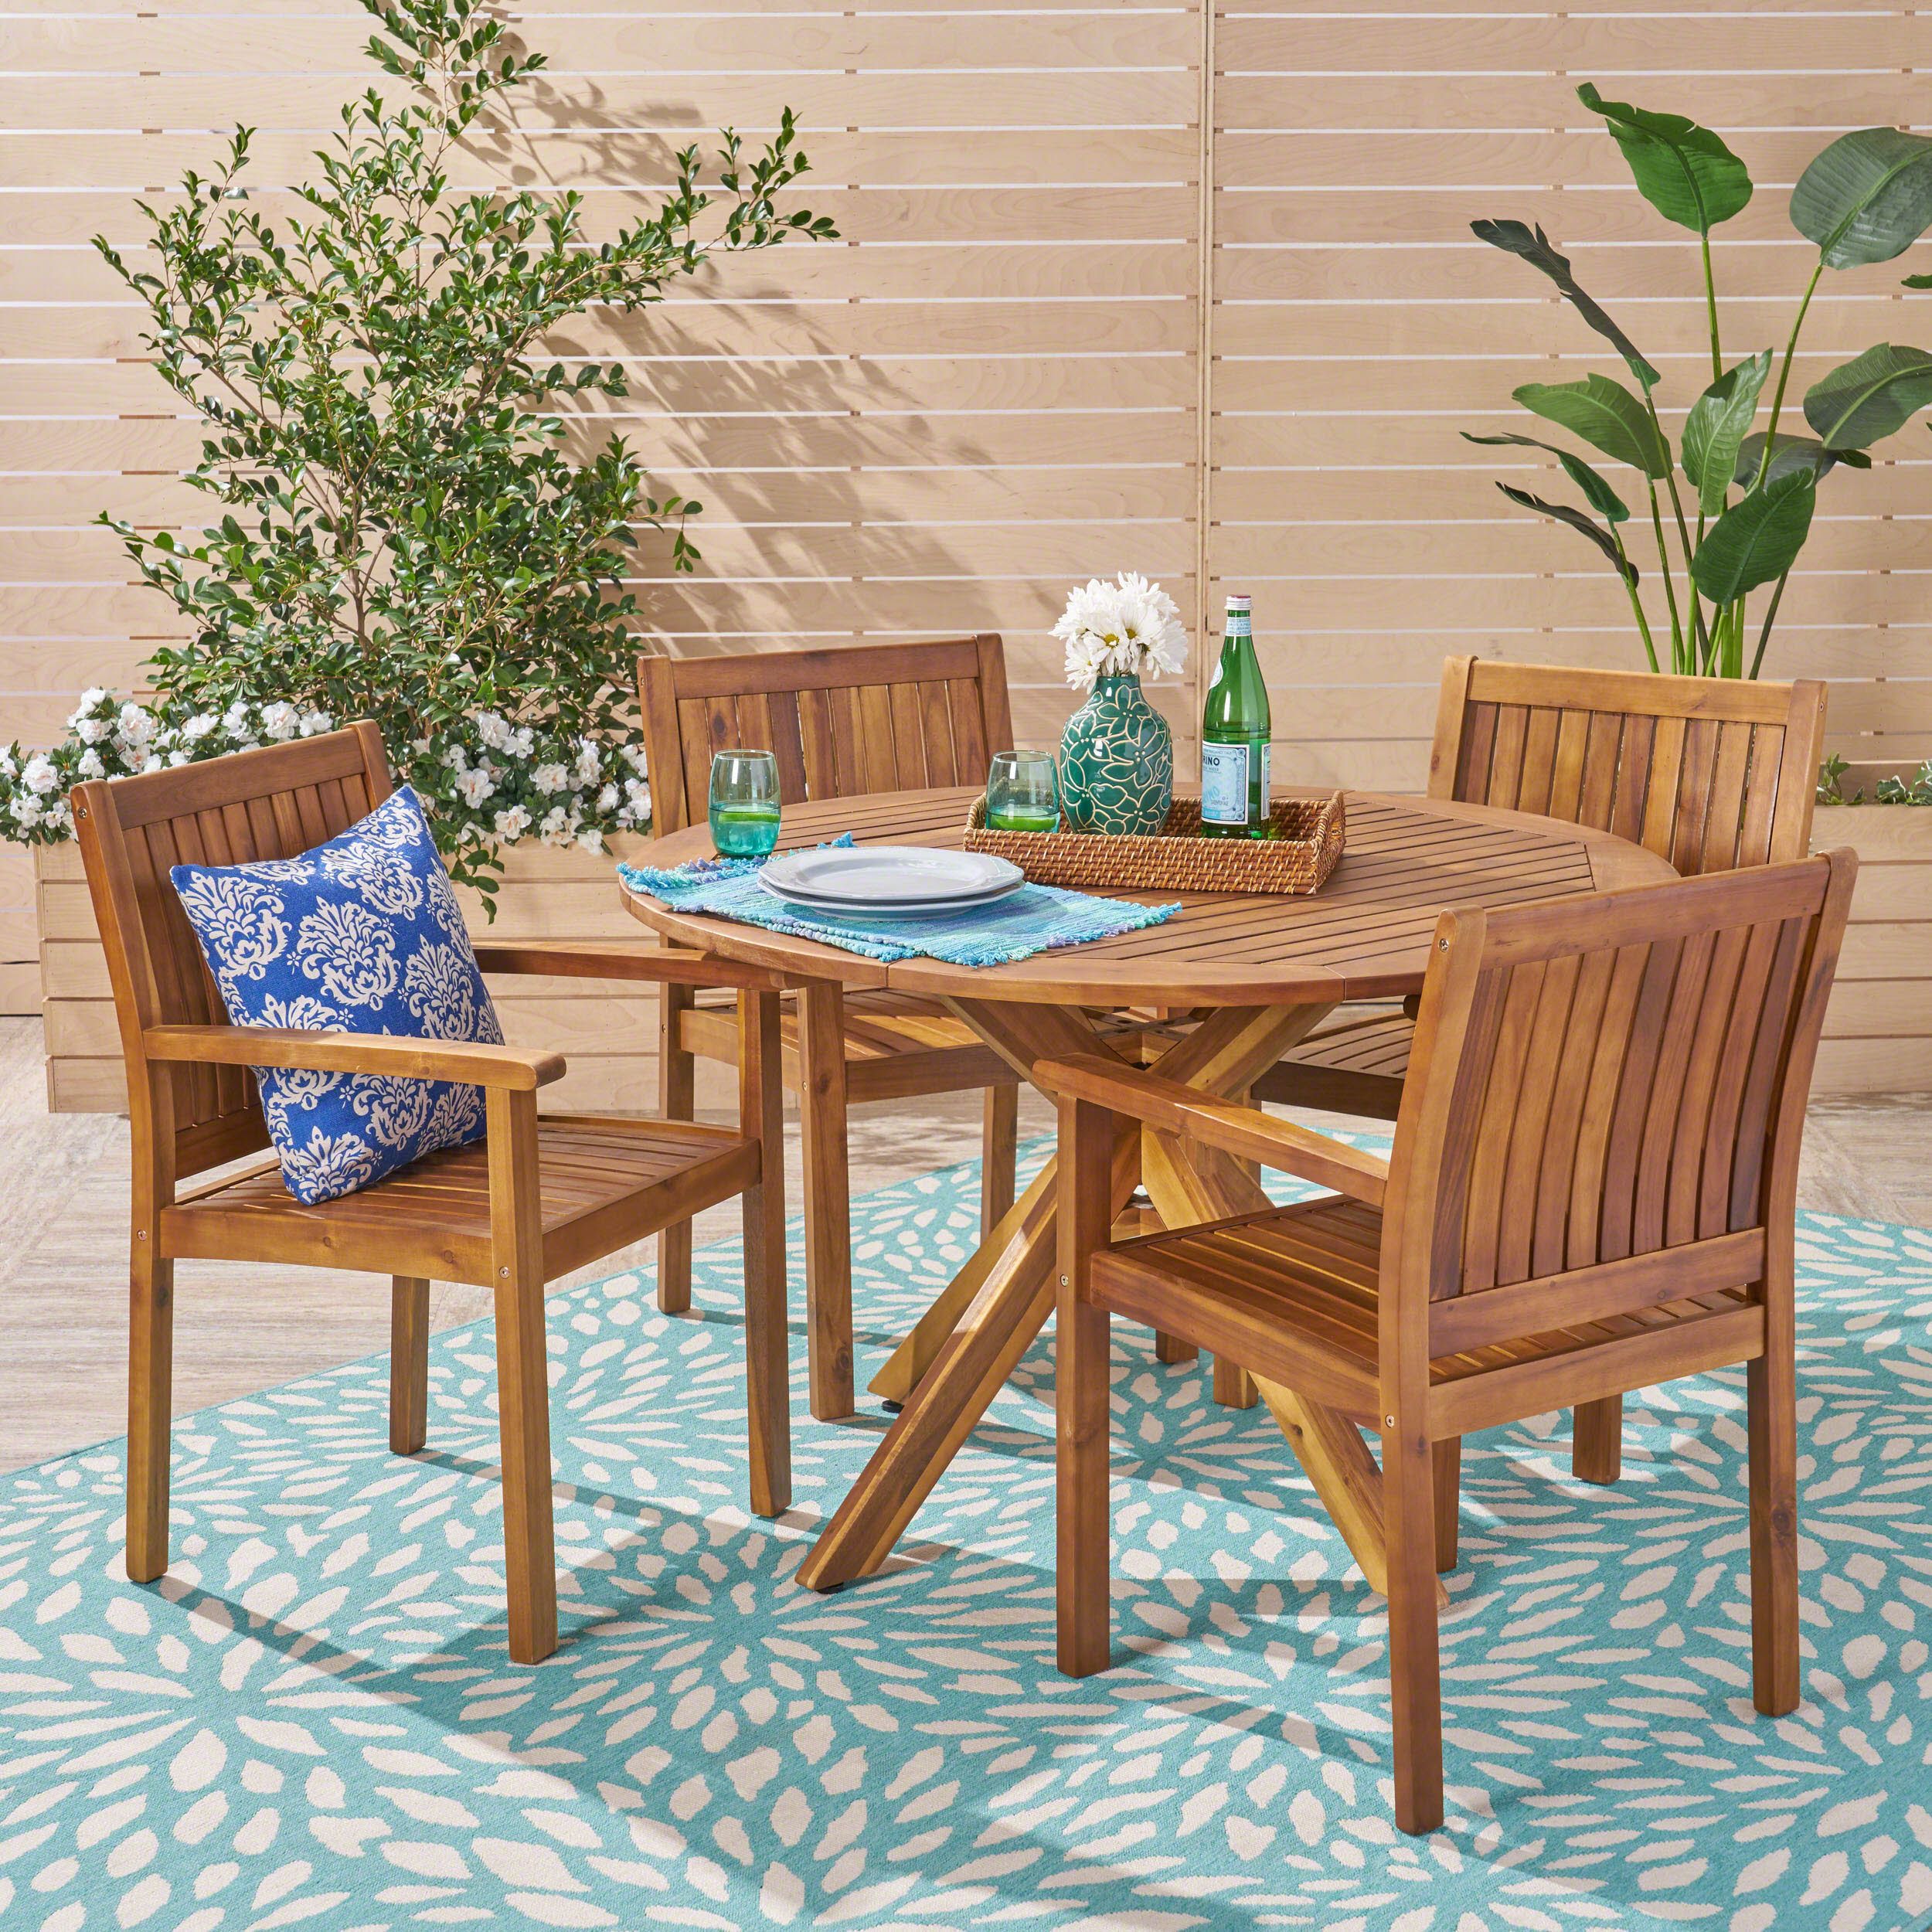 Hanna Outdoor 5 Piece Acacia Wood Dining Set, Teak – Walmart Pertaining To Wood Bistro Table And Chairs Sets (View 4 of 15)